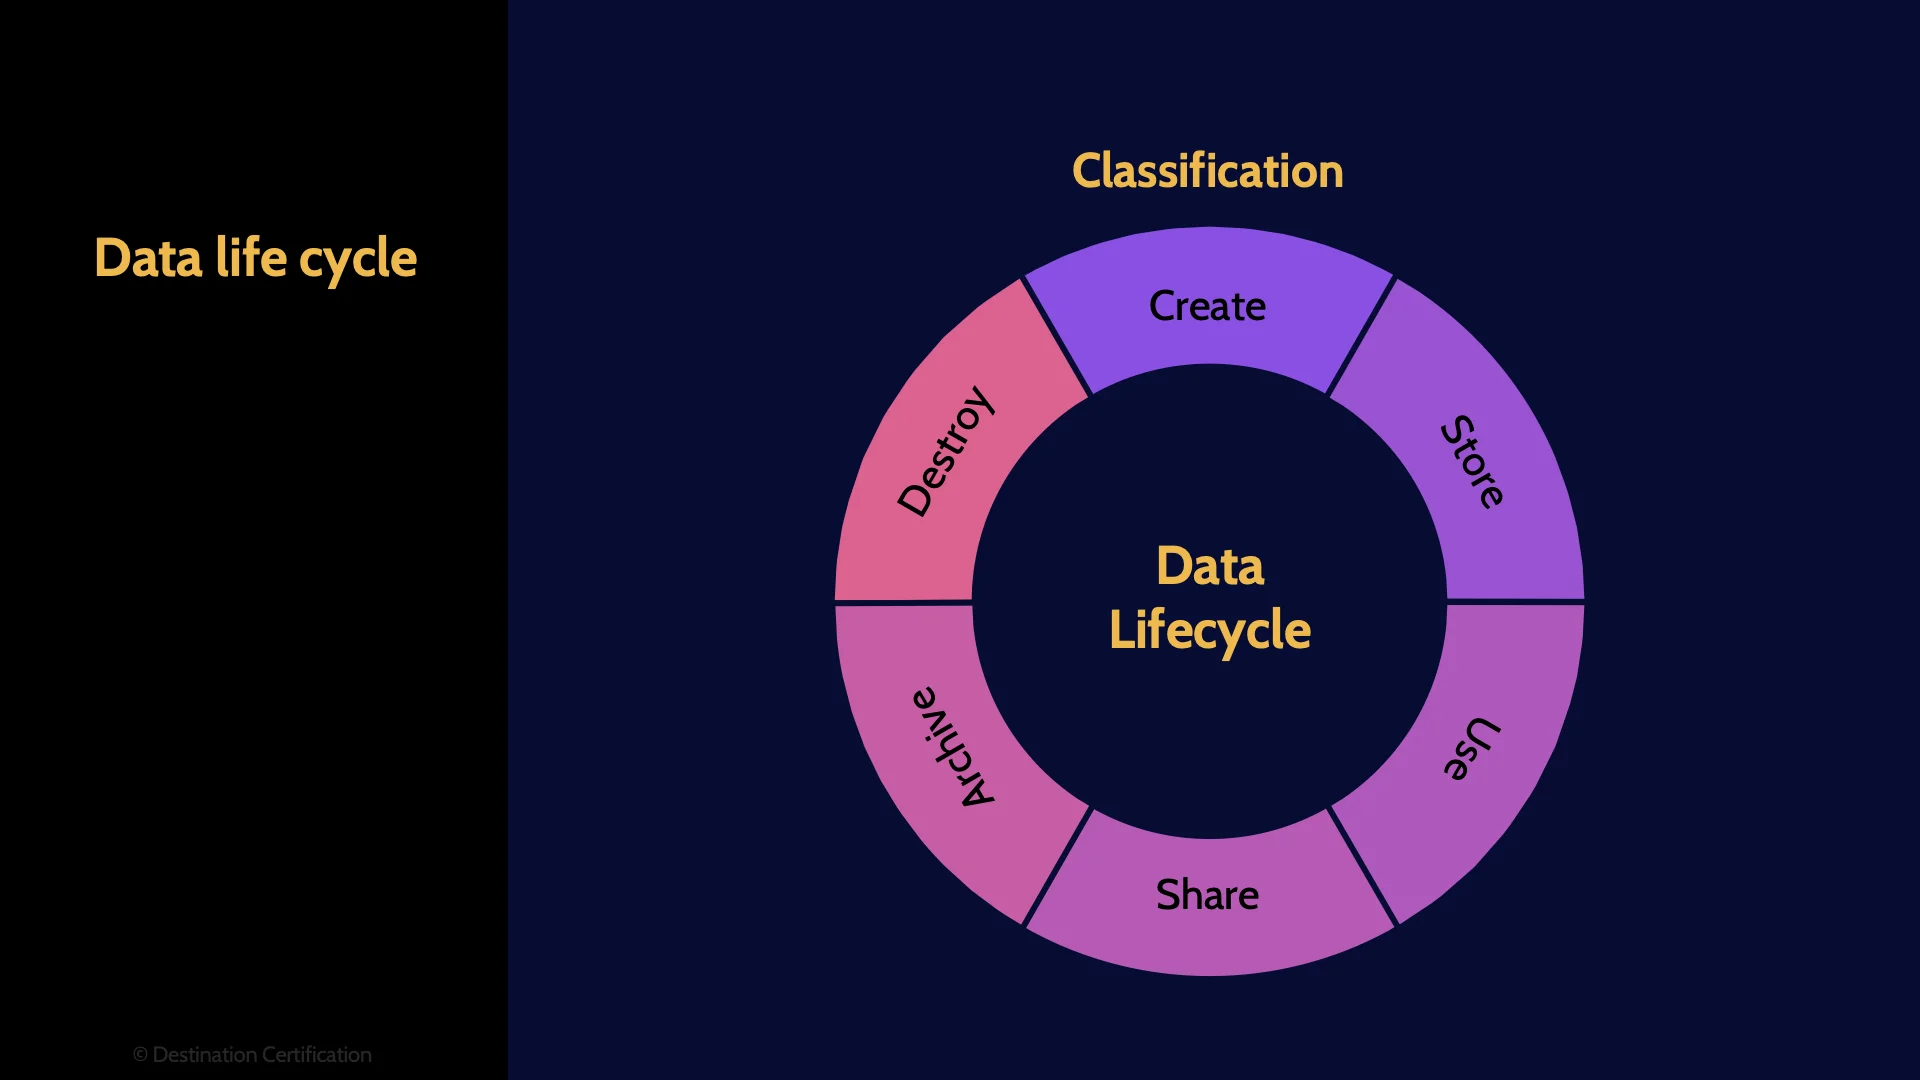 Image of data life cycle - Destination Certification